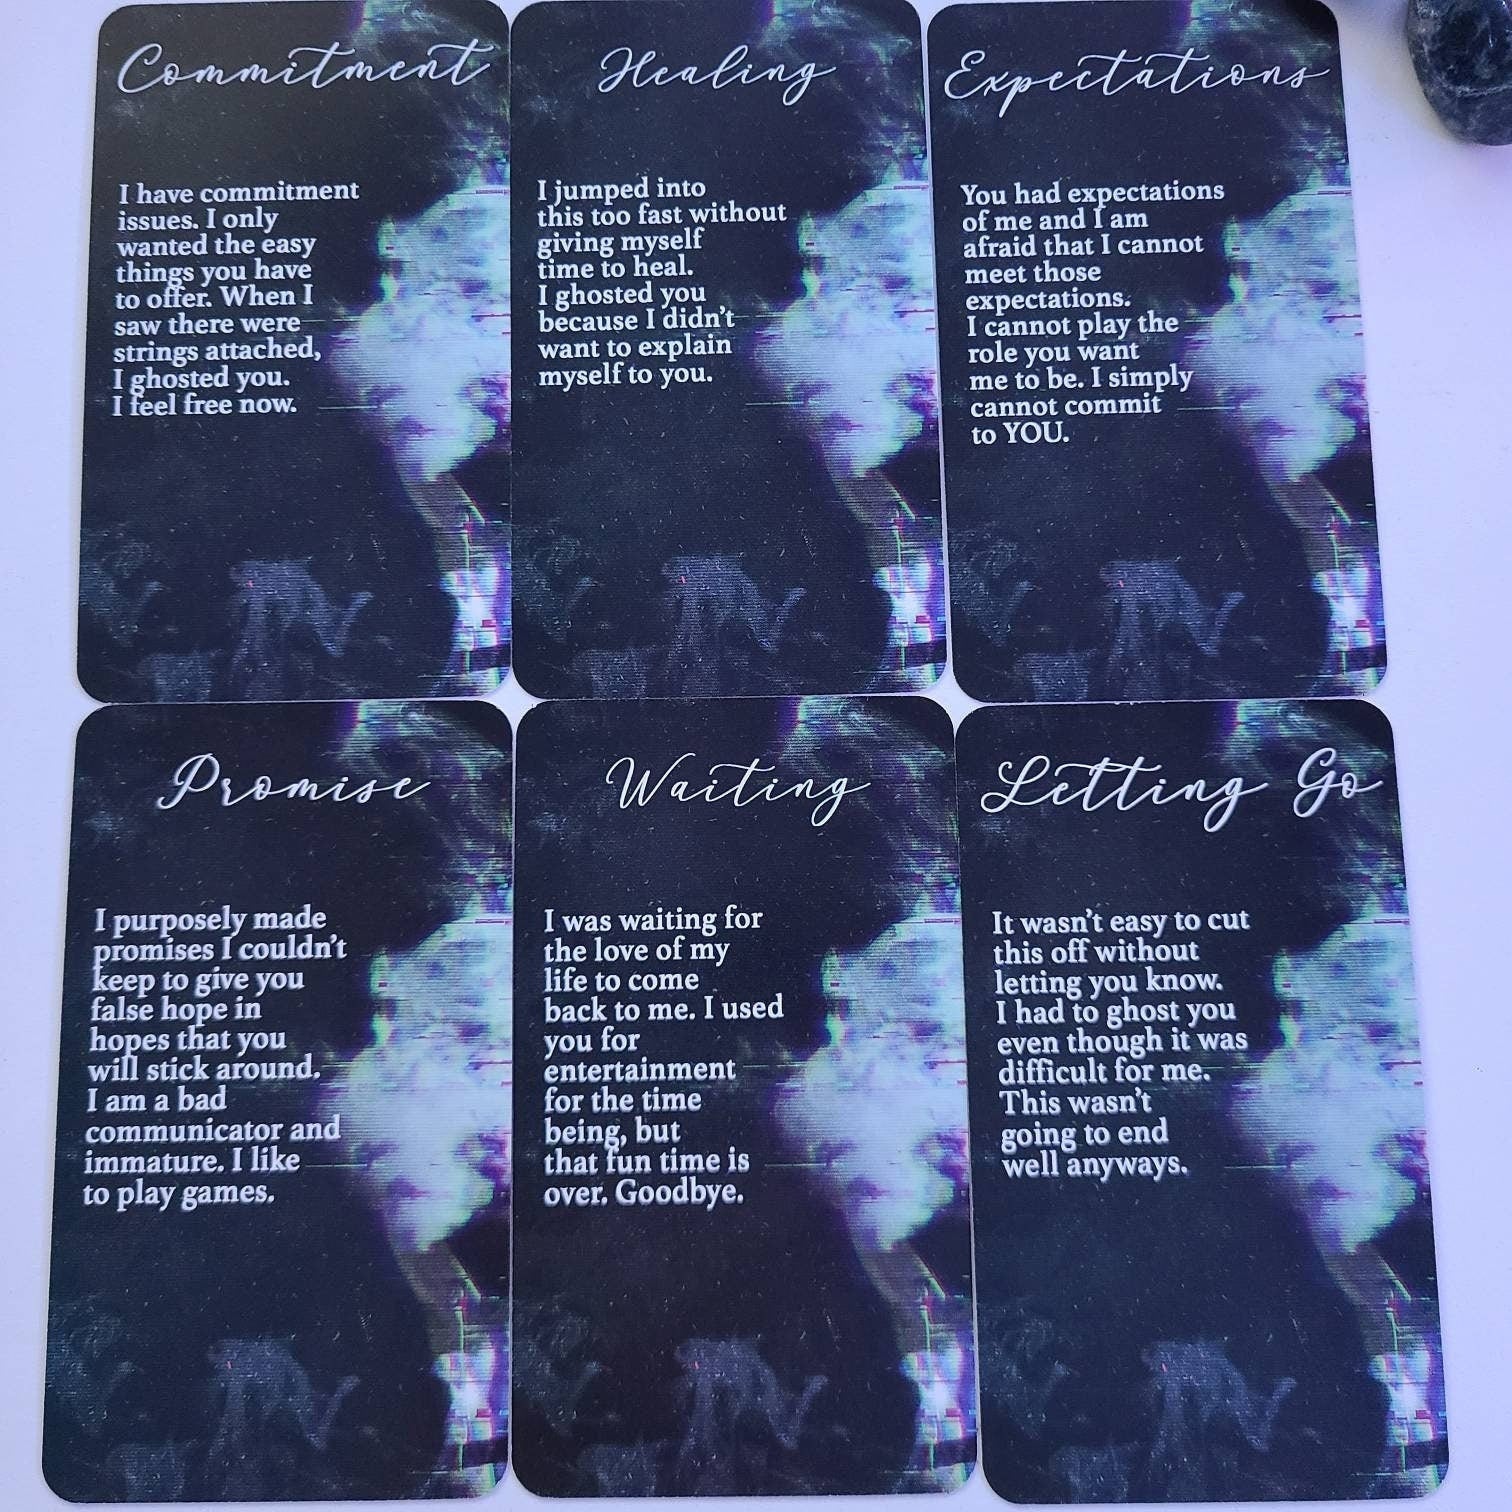 GHOSTED CONFESSIONS Oracle Deck Unspoken Truth Situations Deck Tarot Deck Twin Flame Deck Love Oracle Channeled Messages Deck 80 Cards - MysticBluuMoonTarot